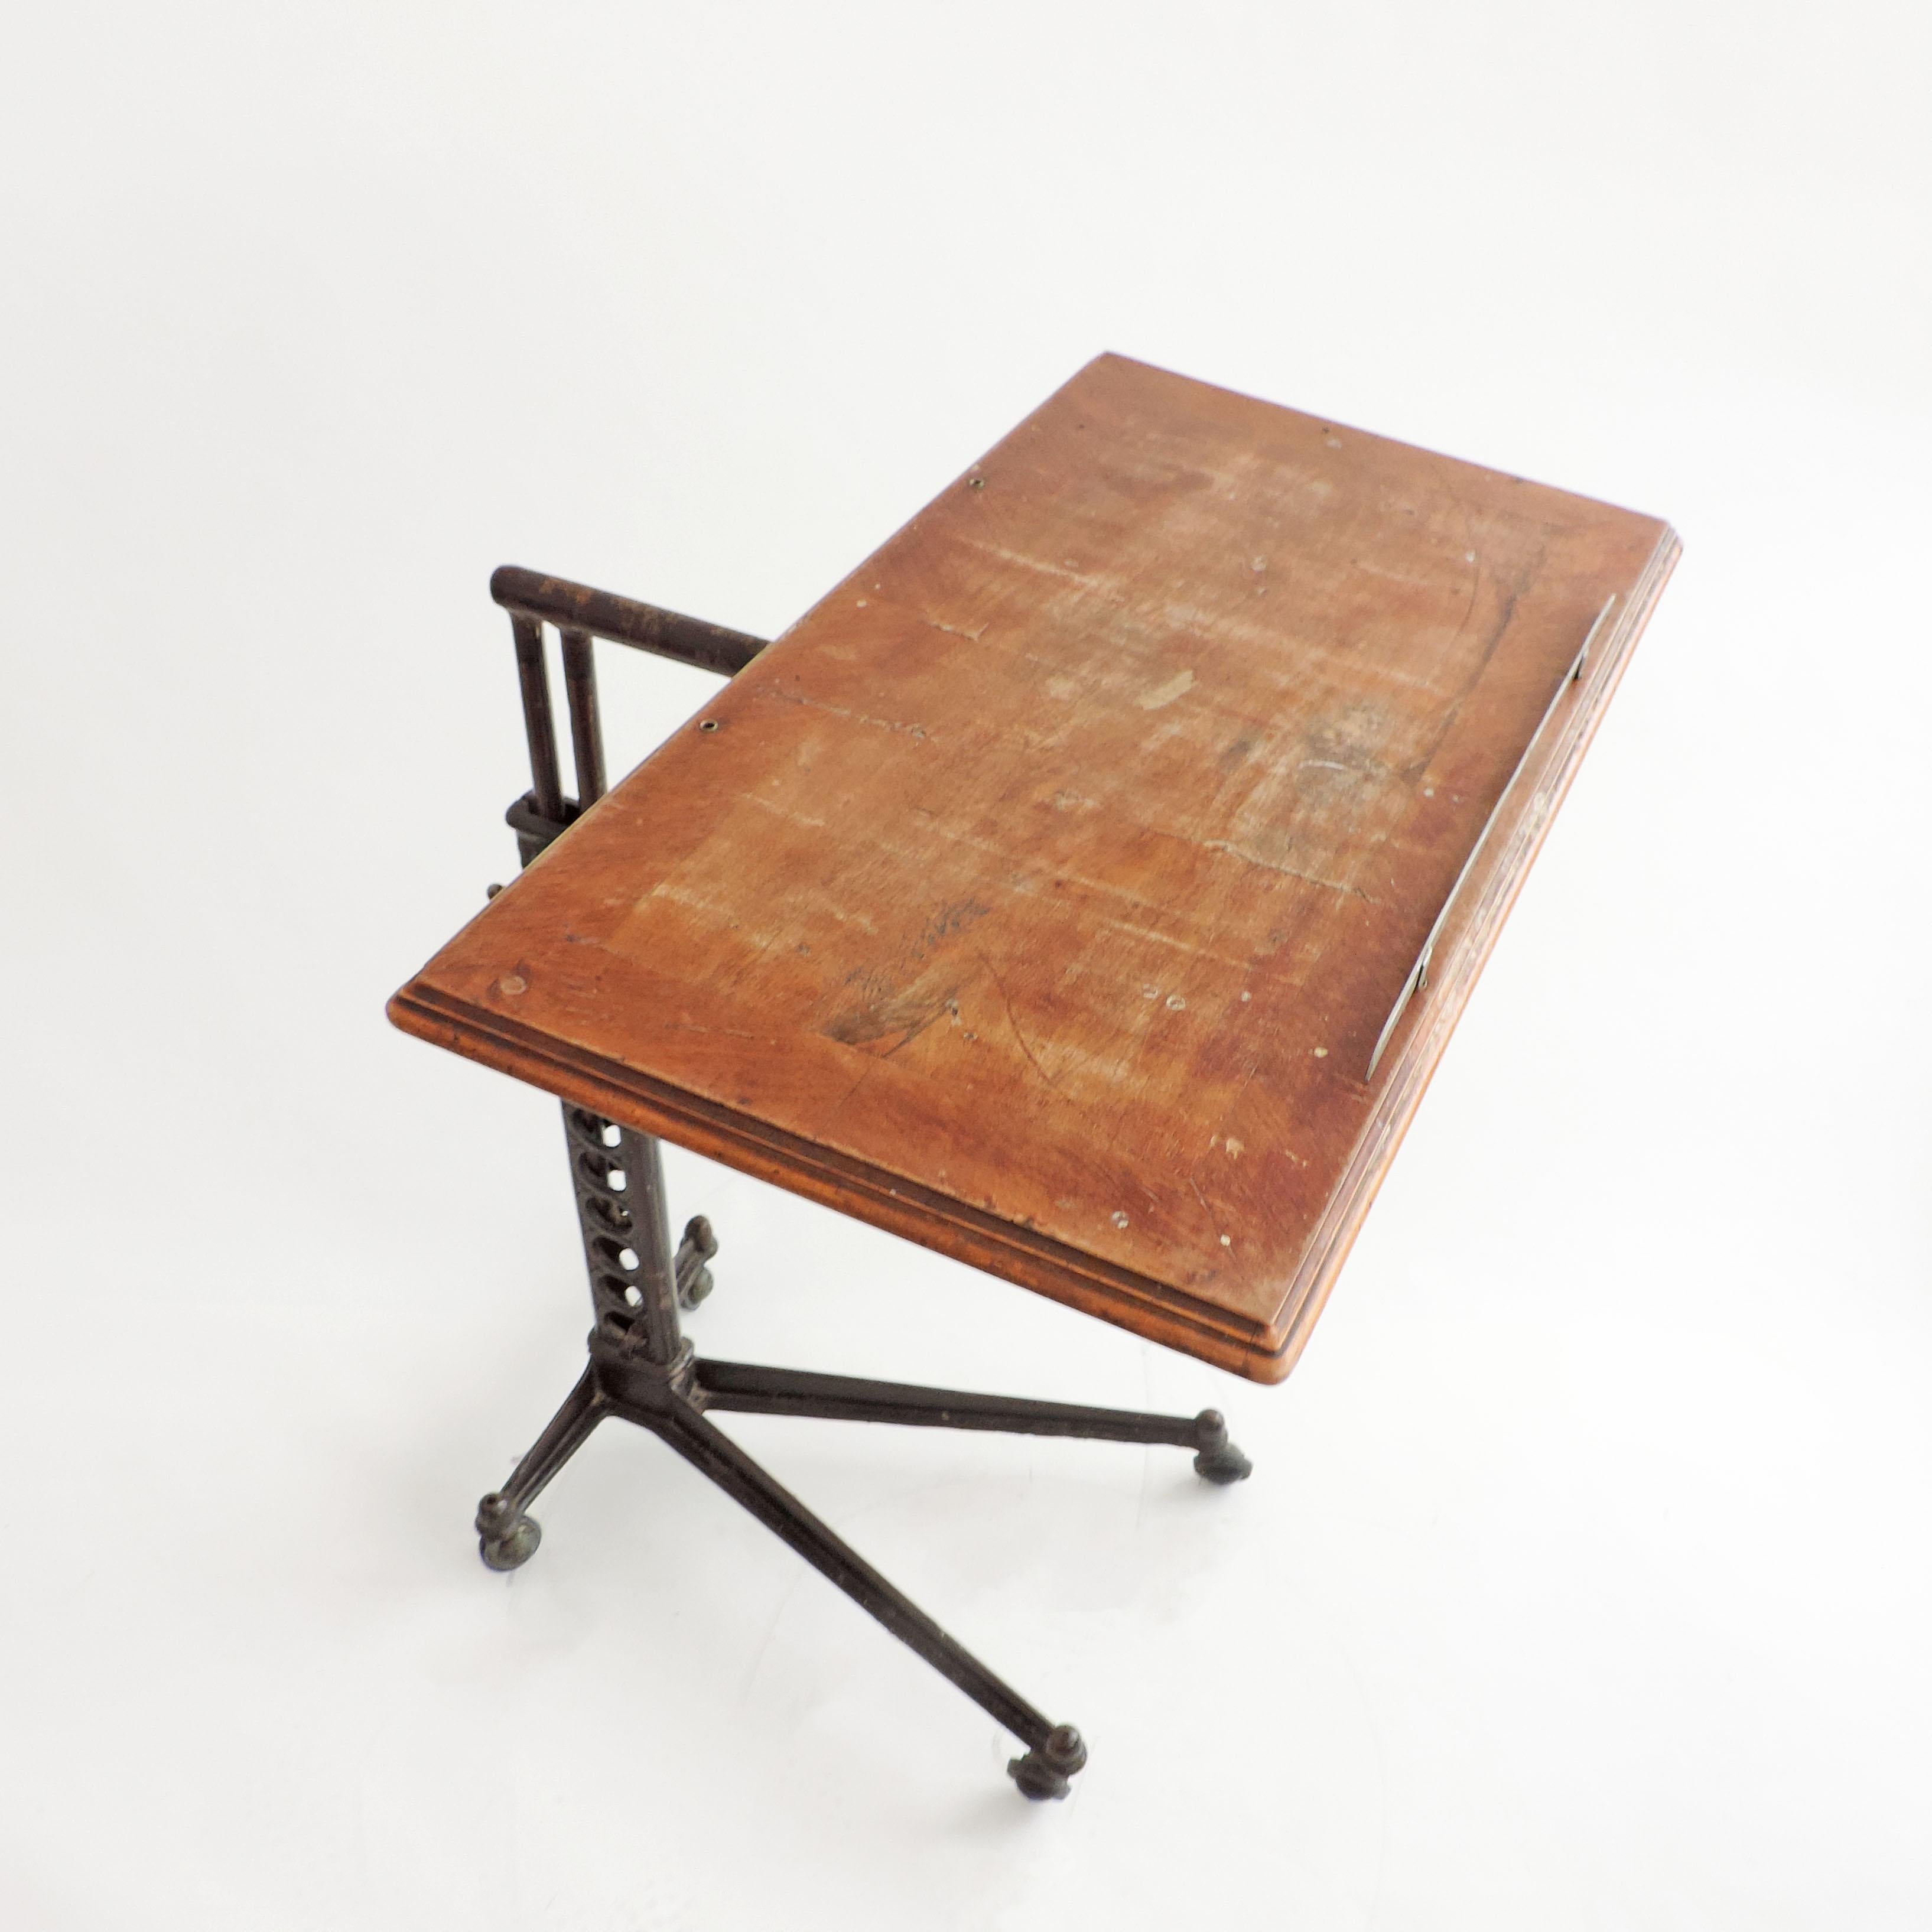 1900s Adjustable Utility Table in Metal and Wood.
Beautifully manufactured.
The Tabletop fully rotates sideways / UpandDown.
 